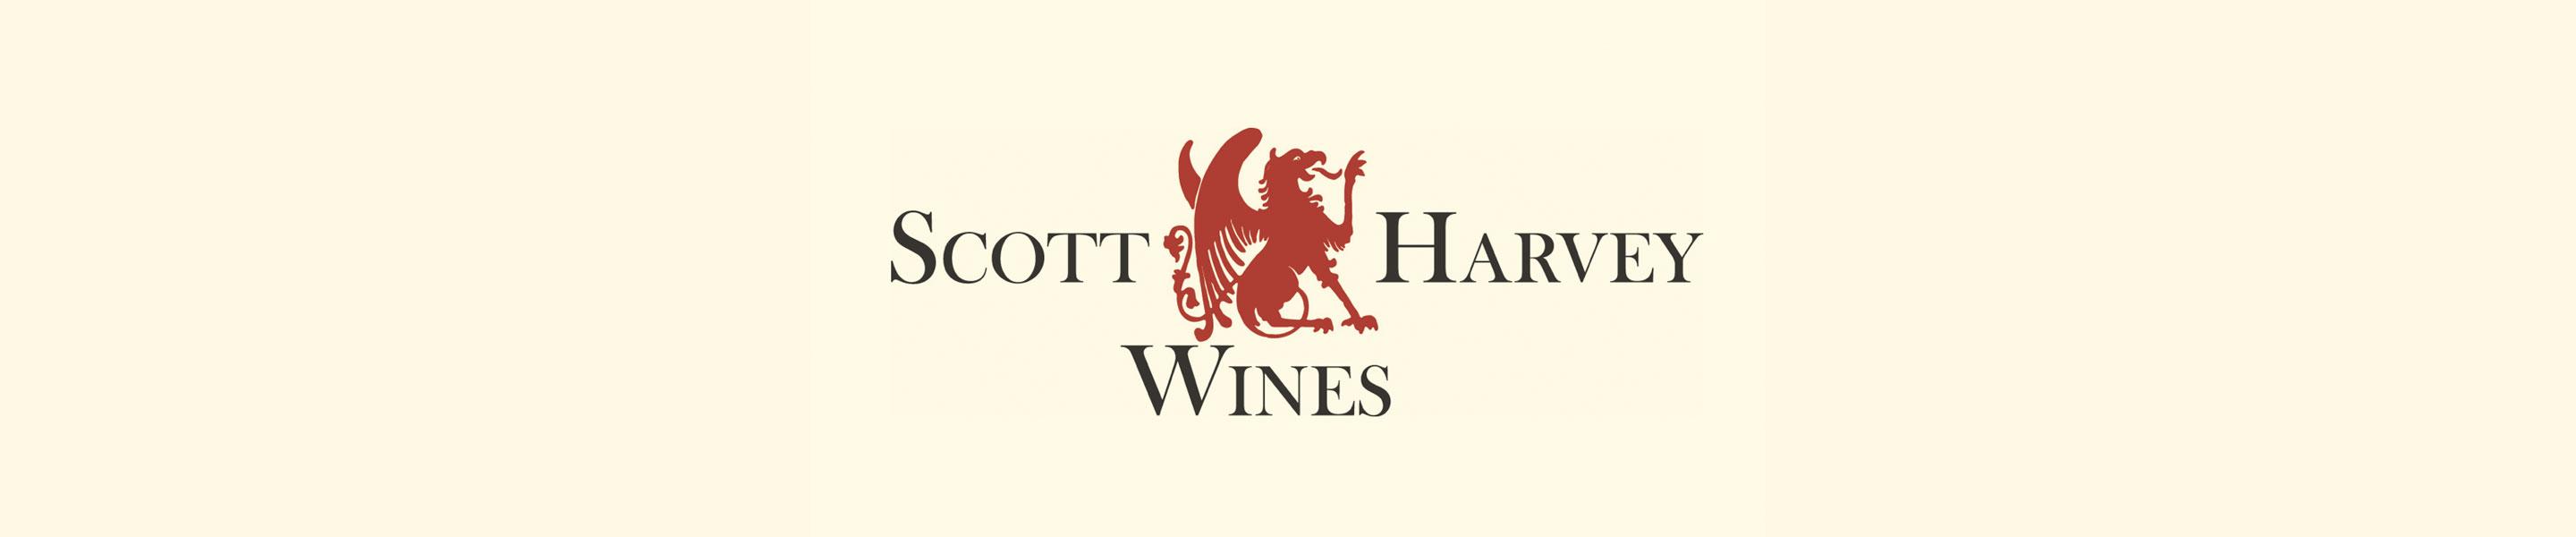 Scott Harvey Wines, the initial line of wines in the “Creative Wine Concepts” portfolio, was created out of market demand for Scott’s wines – “niche wines that over deliver.” The Scott Harvey line focuses on Scott’s roots – Zinfandel, Syrah and Barbera from the Sierras. Approachable, food friendly and full of luscious fruit, these wines have struck a cord in the marketplace. Scott has hit his stride with his new mantra – “Scott Harvey Wines, it’s time!” Stay tuned – this is just the beginning!